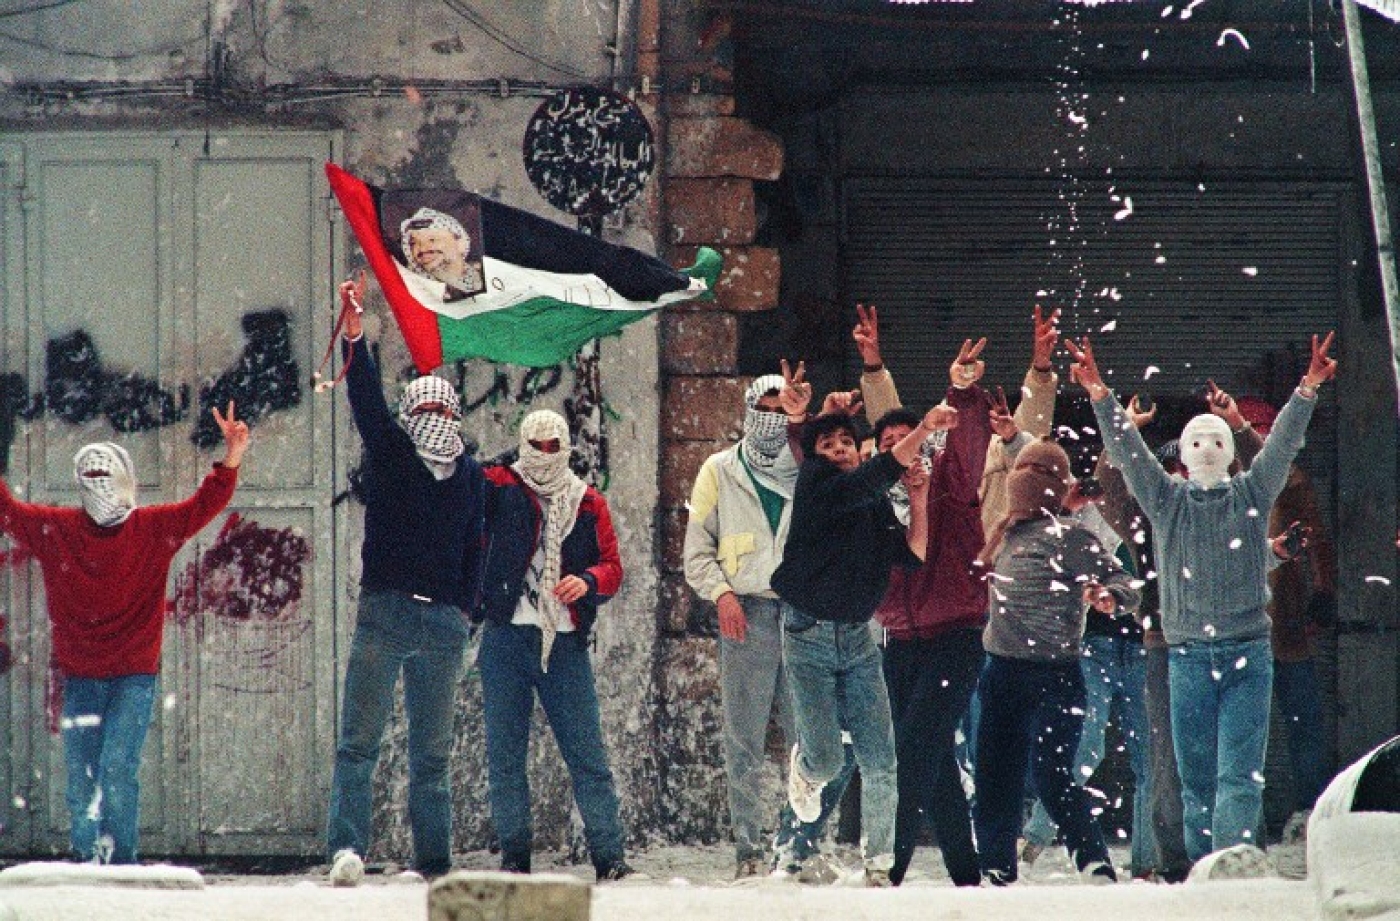 Thirty years after first intifada, Palestinians look to past for fresh  lessons | Middle East Eye